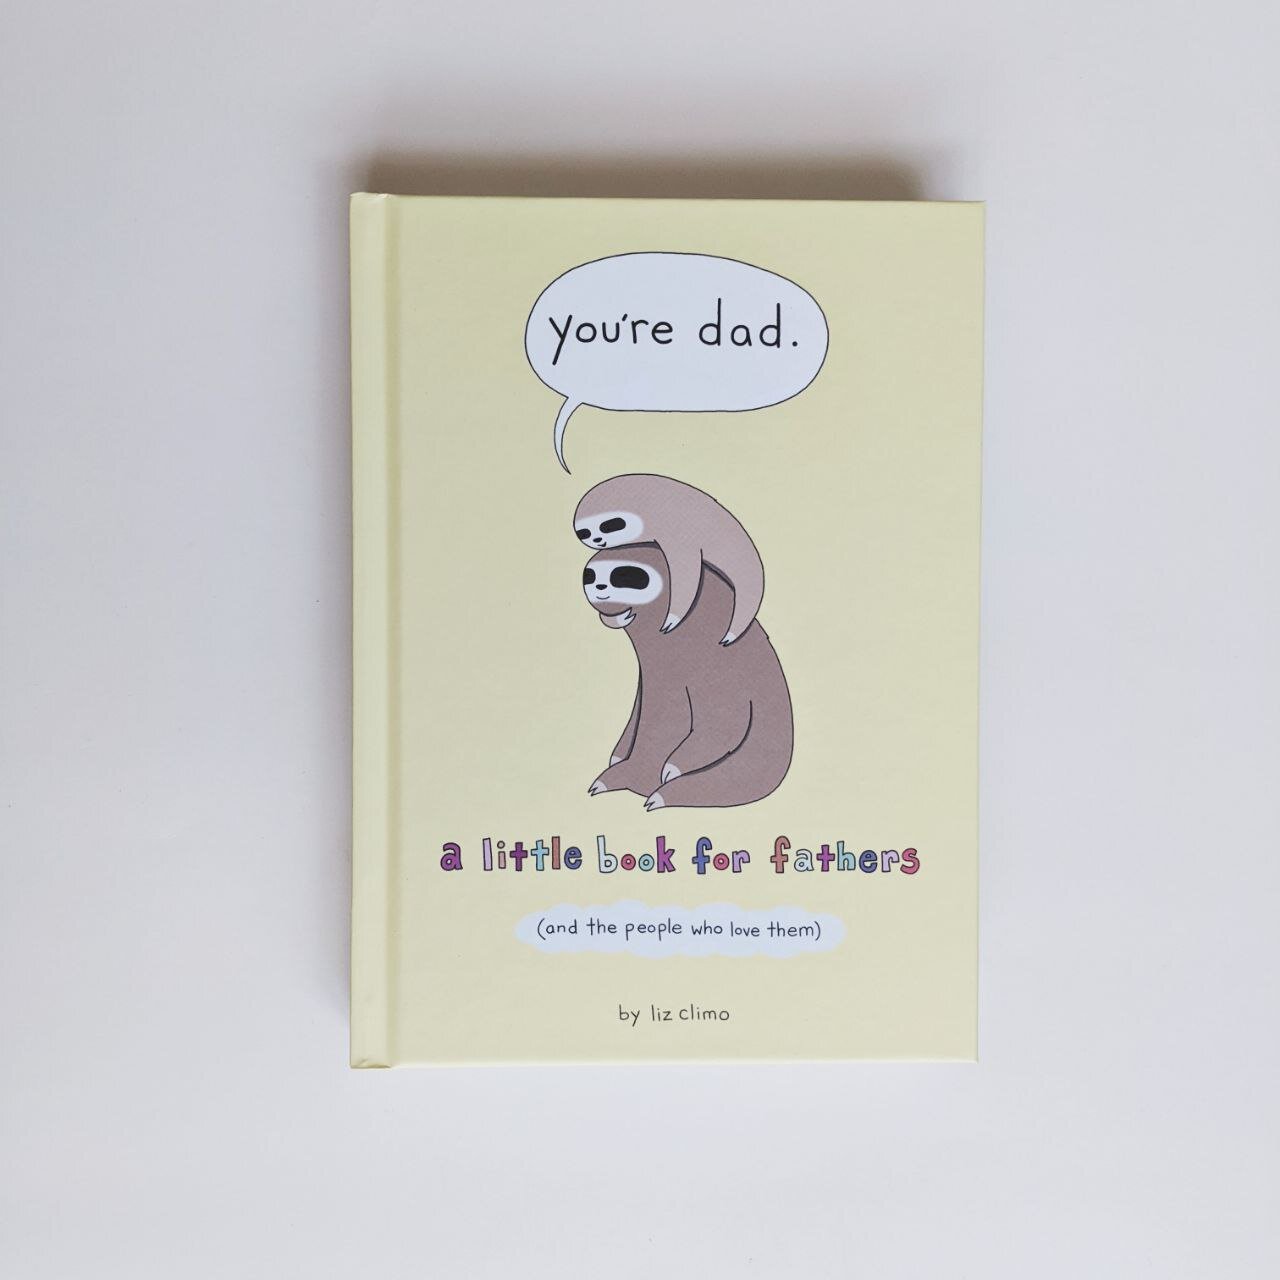 You're Dad by Liz Climo